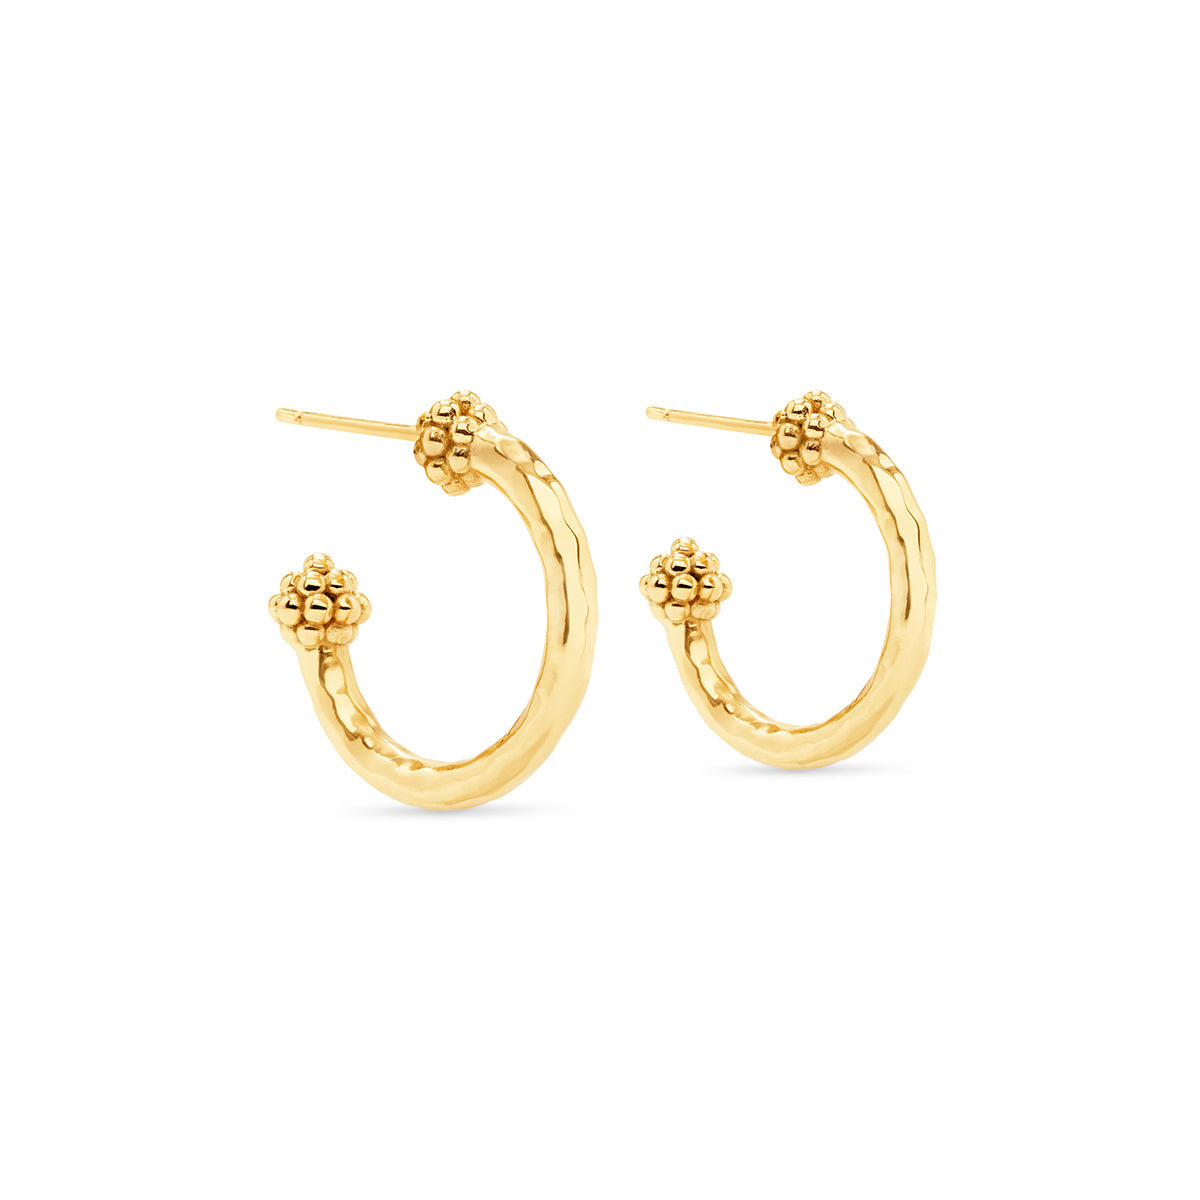 Berry Small Hoop Earrings in Hammered Gold